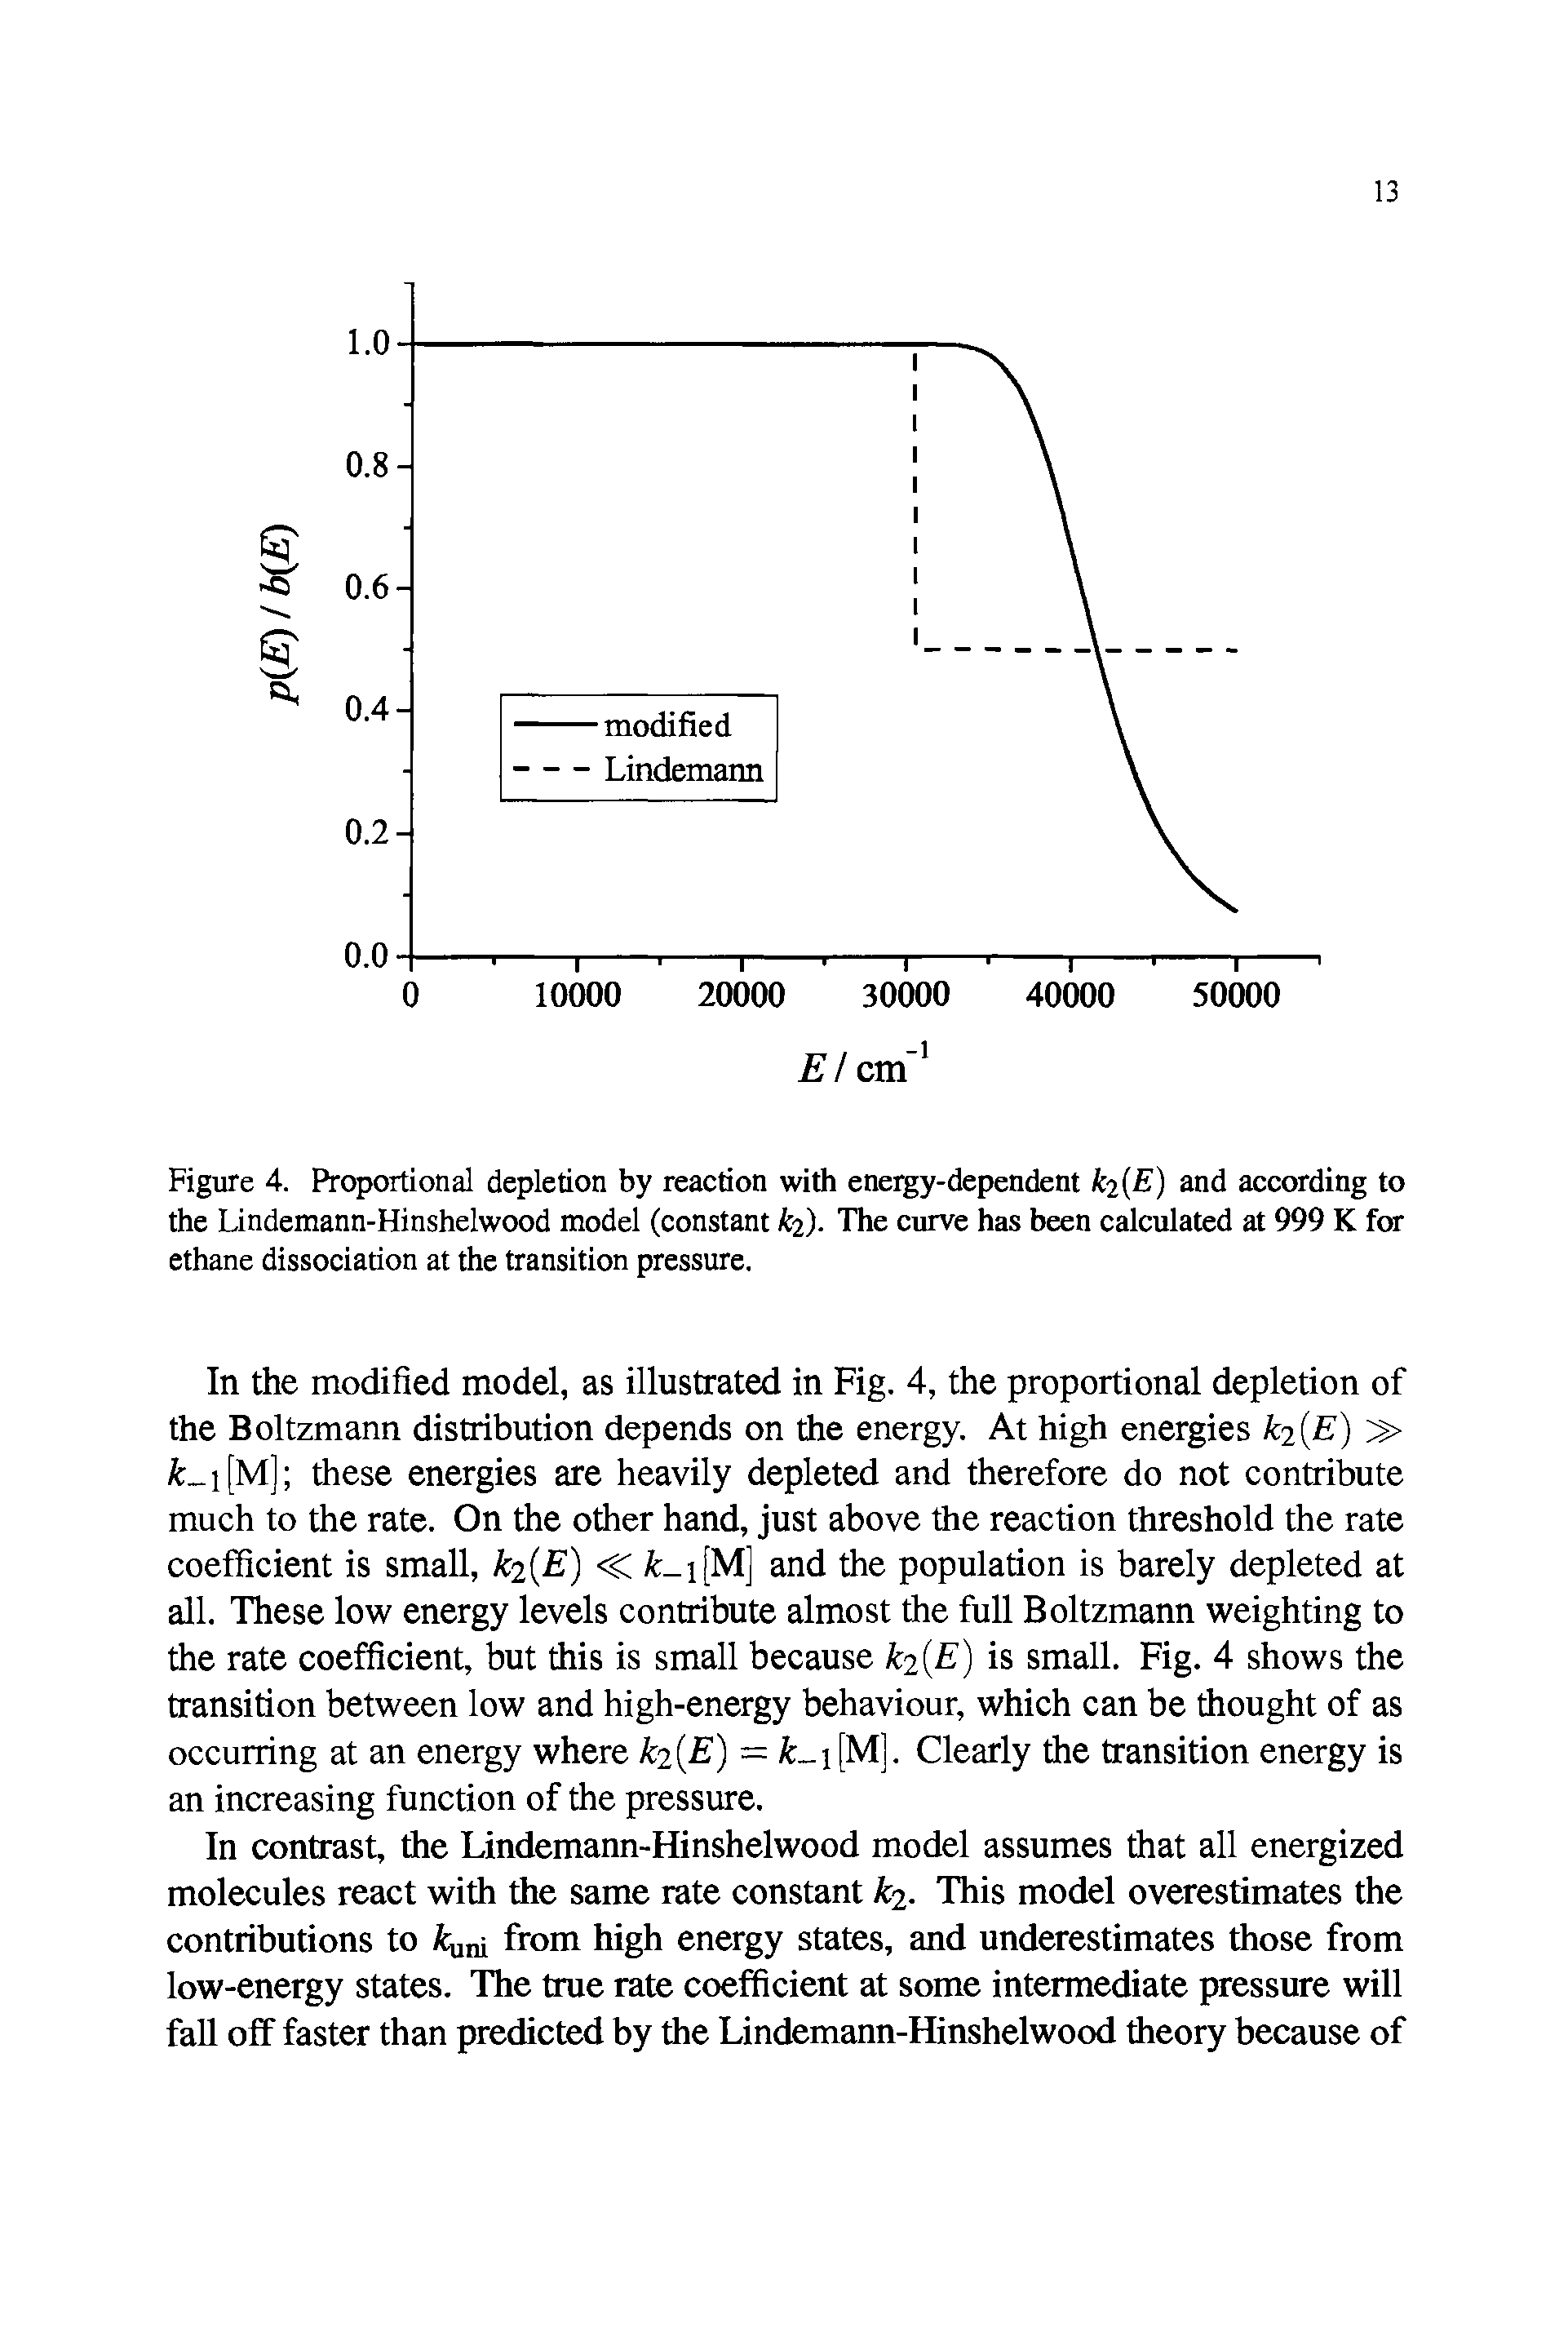 Figure 4. Proportional depletion by reaction with energy-dependent k2 E) and according to the Lindemann-Hinshelwood model (constant kz). The curve has been calculated at 999 K for ethane dissociation at the transition pressure.